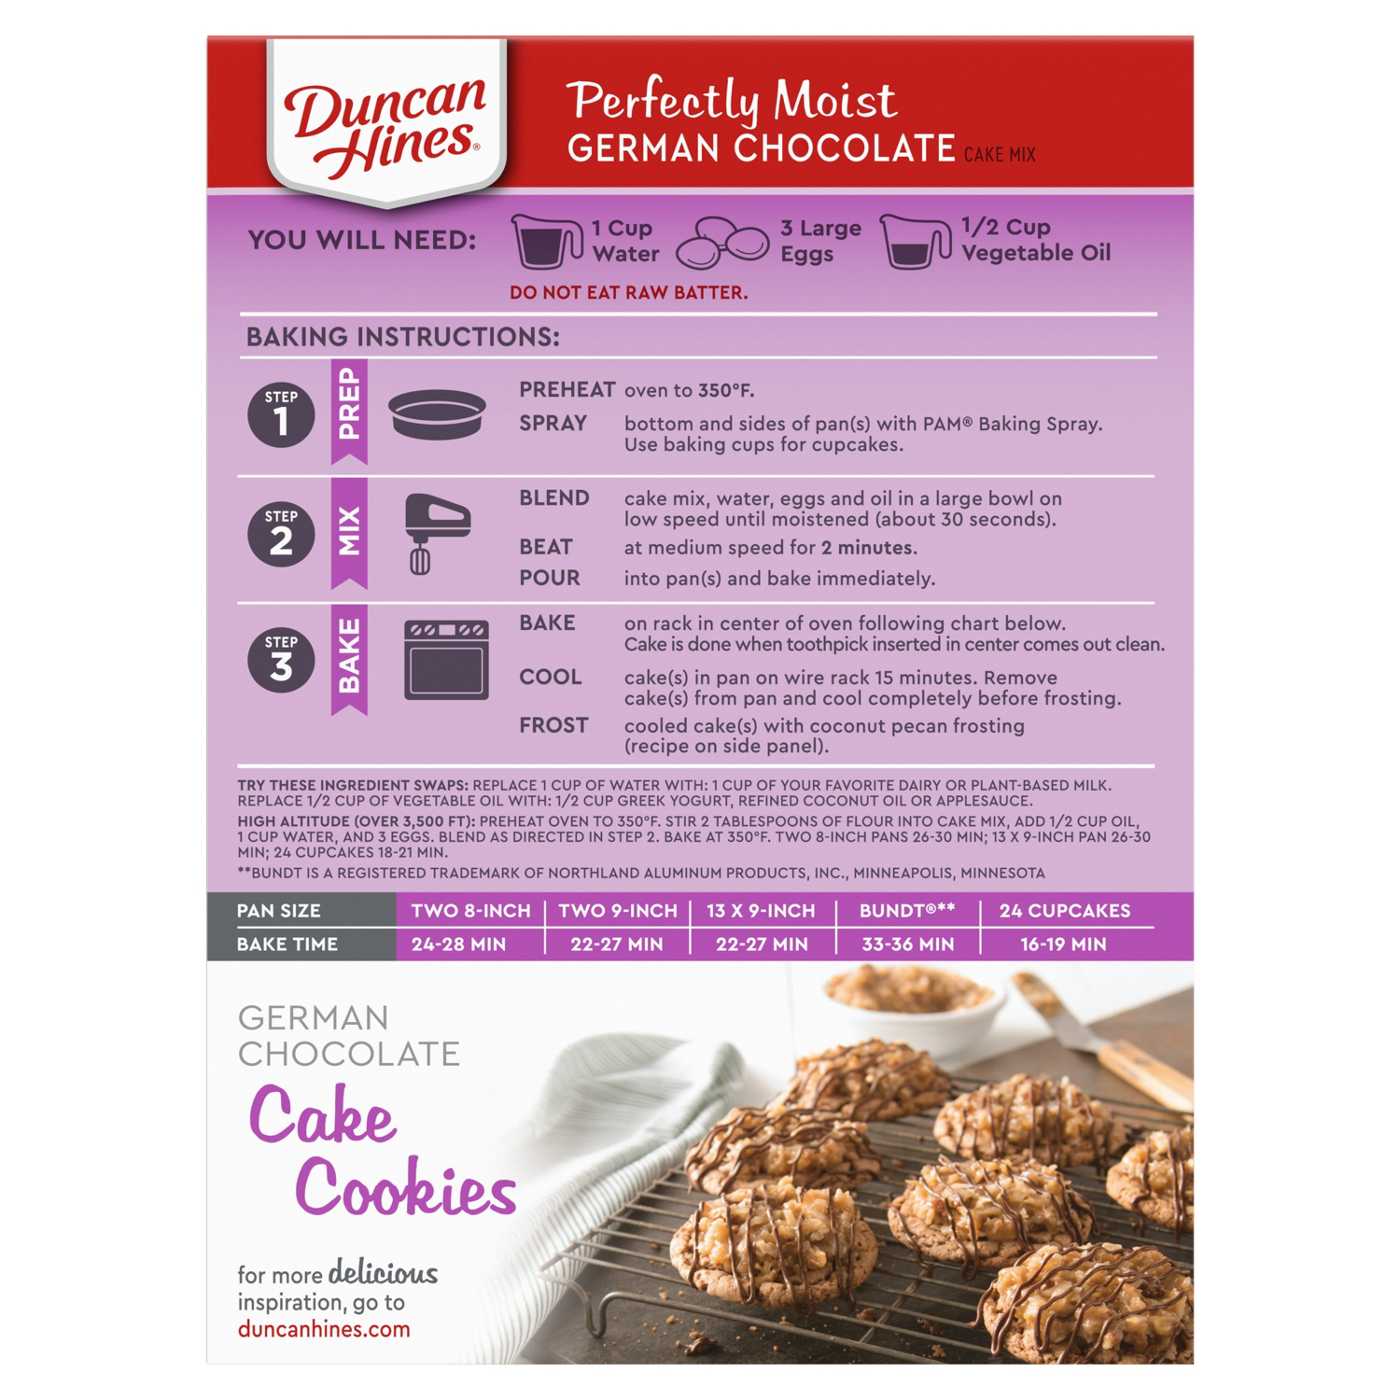 Duncan Hines Signature Perfectly Moist German Chocolate Cake Mix; image 5 of 7